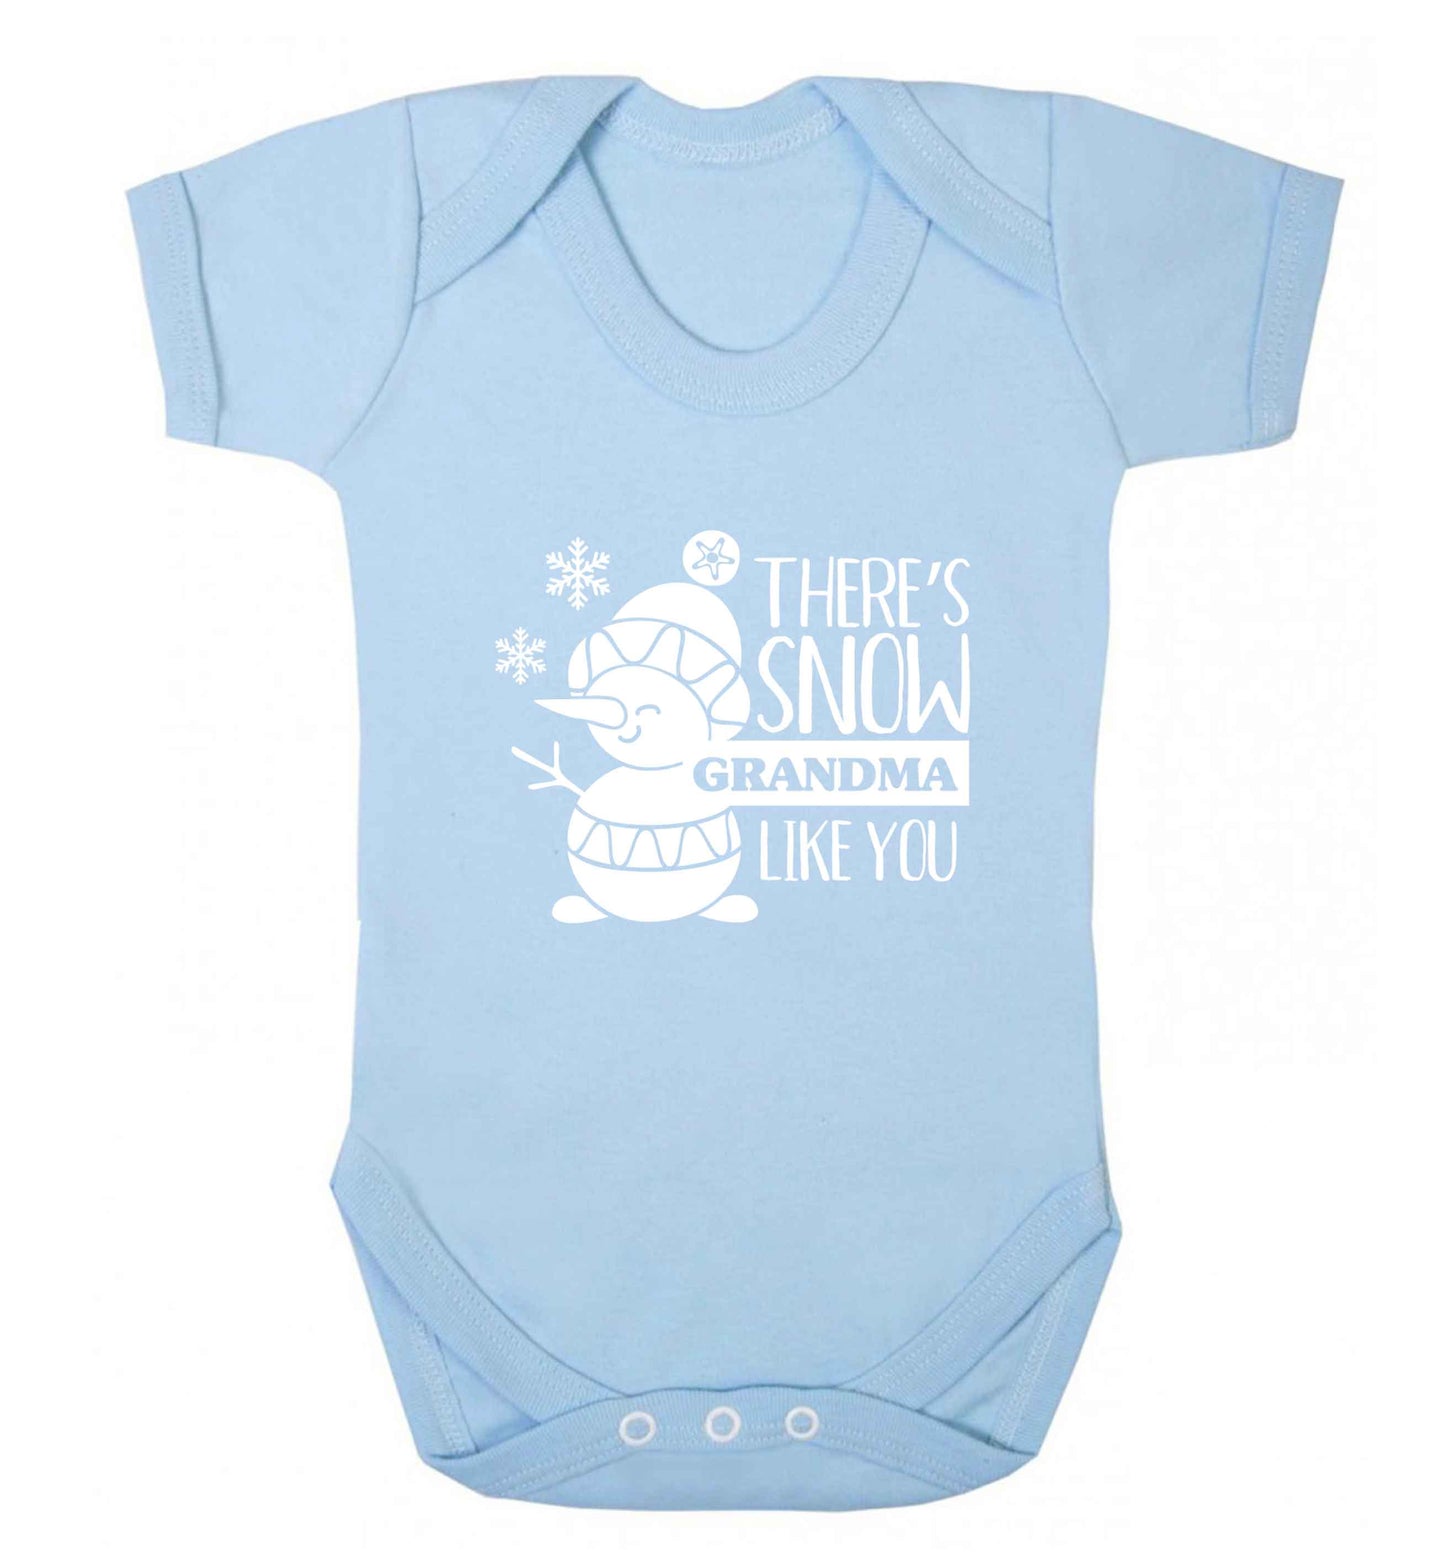 There's snow grandma like you baby vest pale blue 18-24 months